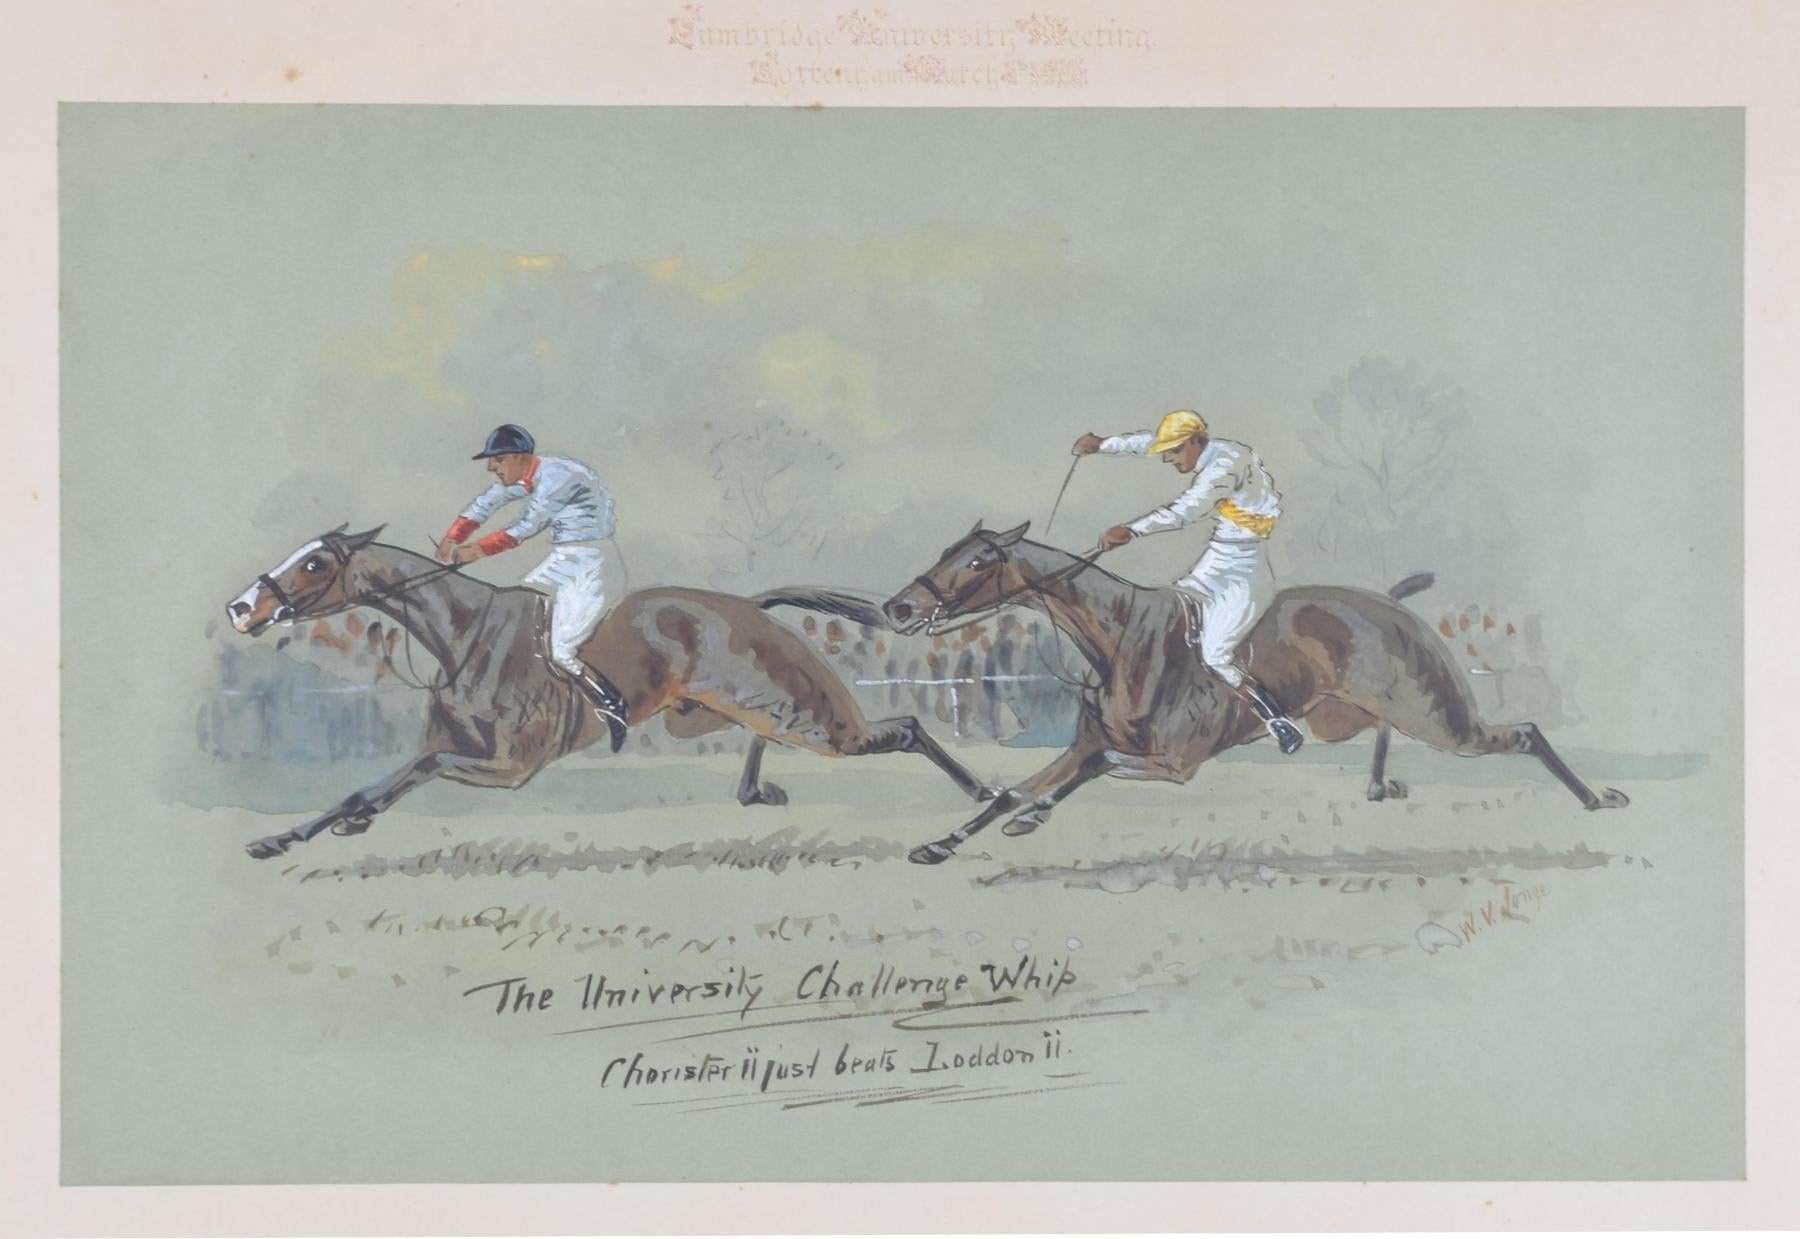 William Verner Longe (1857-1924)
The University Challenge Whip (1900)
Watercolour
29 x 45 cm

Signed and inscribed "Choristor ii just beats Loddon ii". Inscribed 'Cambridge University Meeting, Cottenham, March 1909' to mount.

A lively racing scene